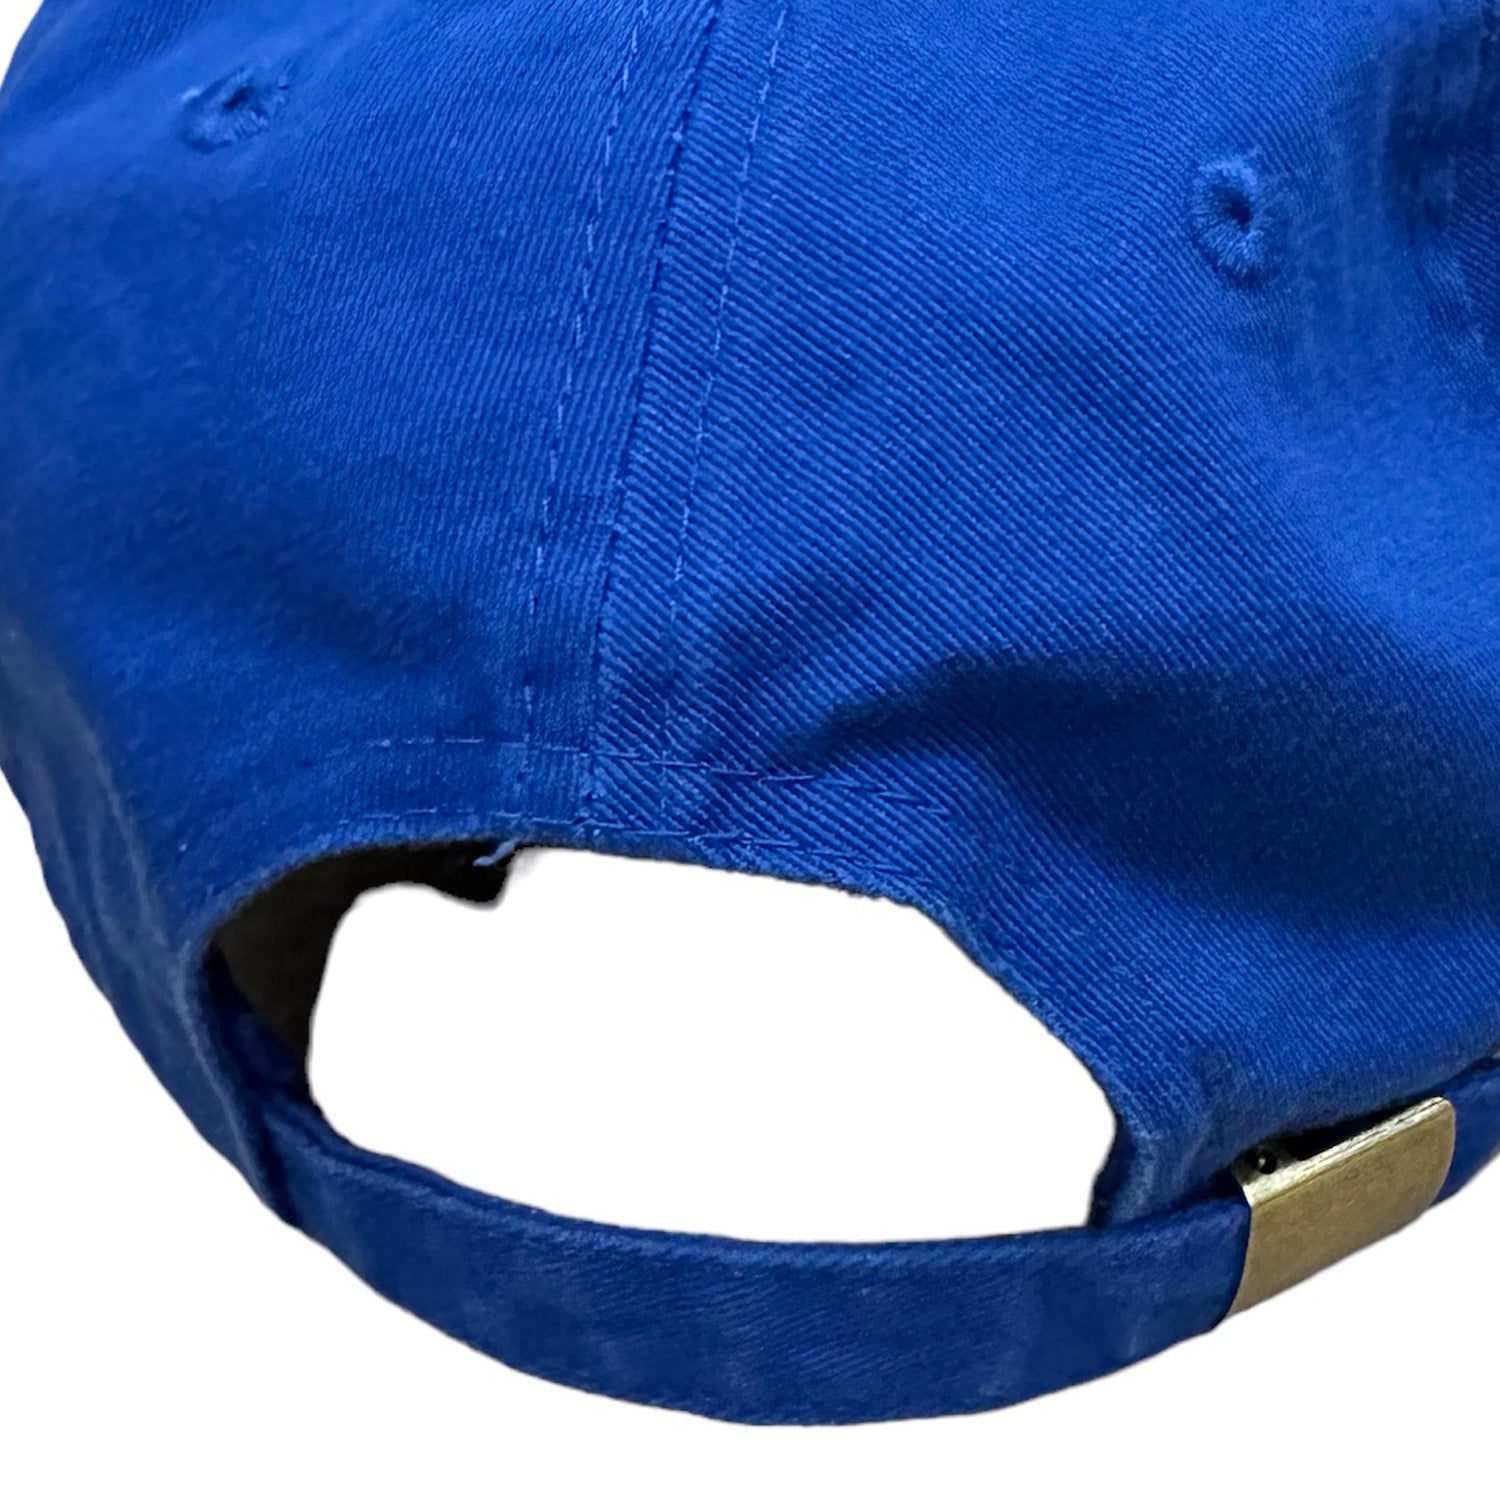 Blue focus 6 panel cap with white disnaeland logo on front. Free uk shipping over £50